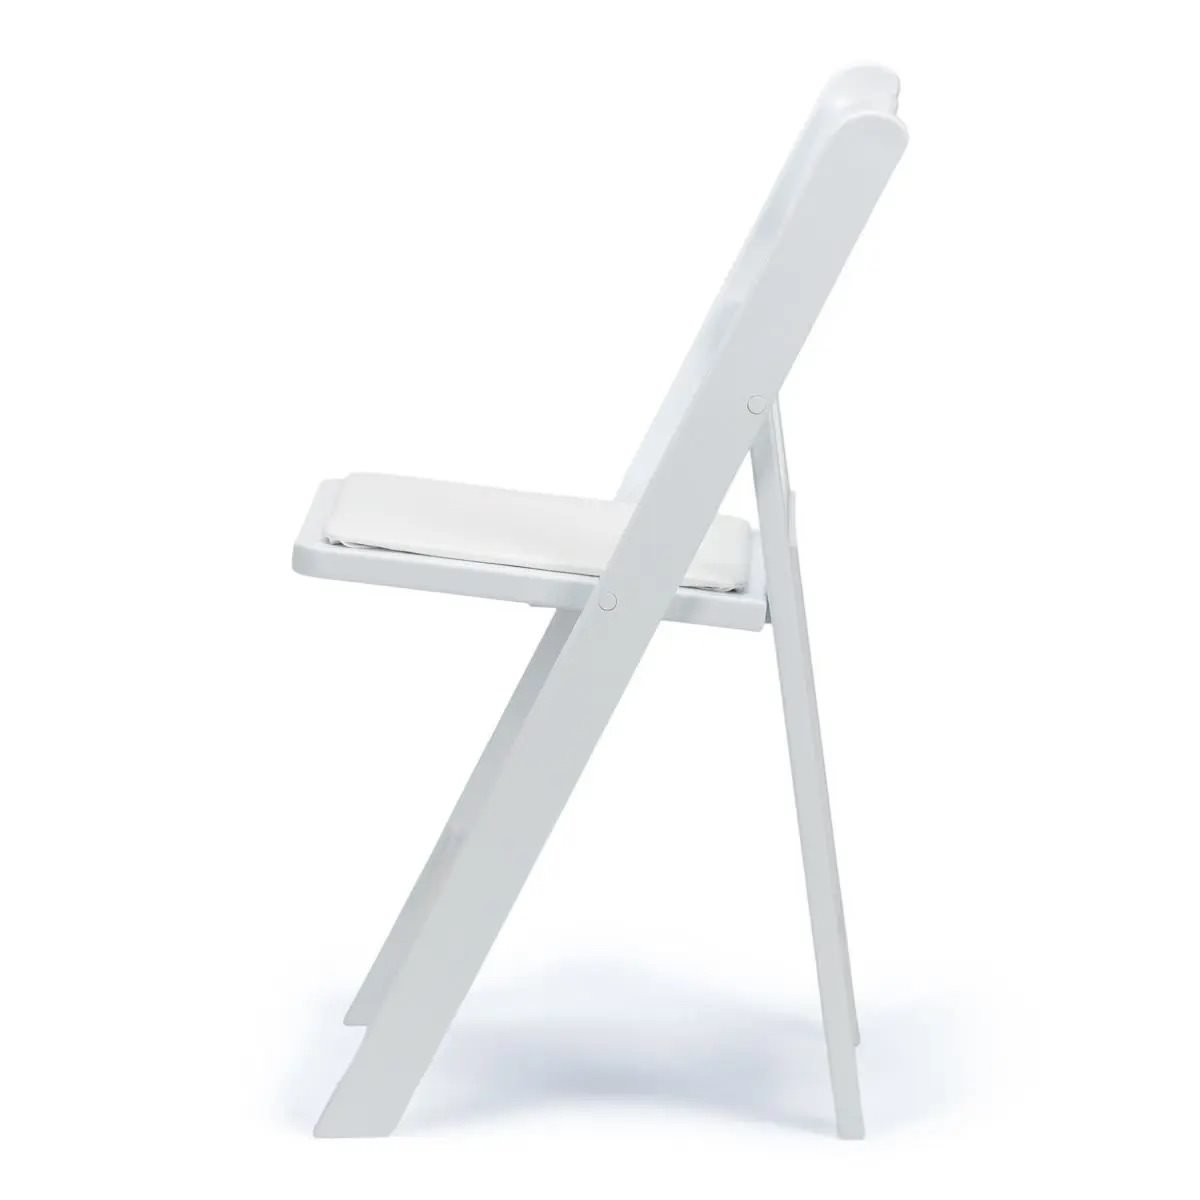 white-resin-folding-chairs-with-padded-seat-hughes-event-rentals-charleston-sc2.jpeg